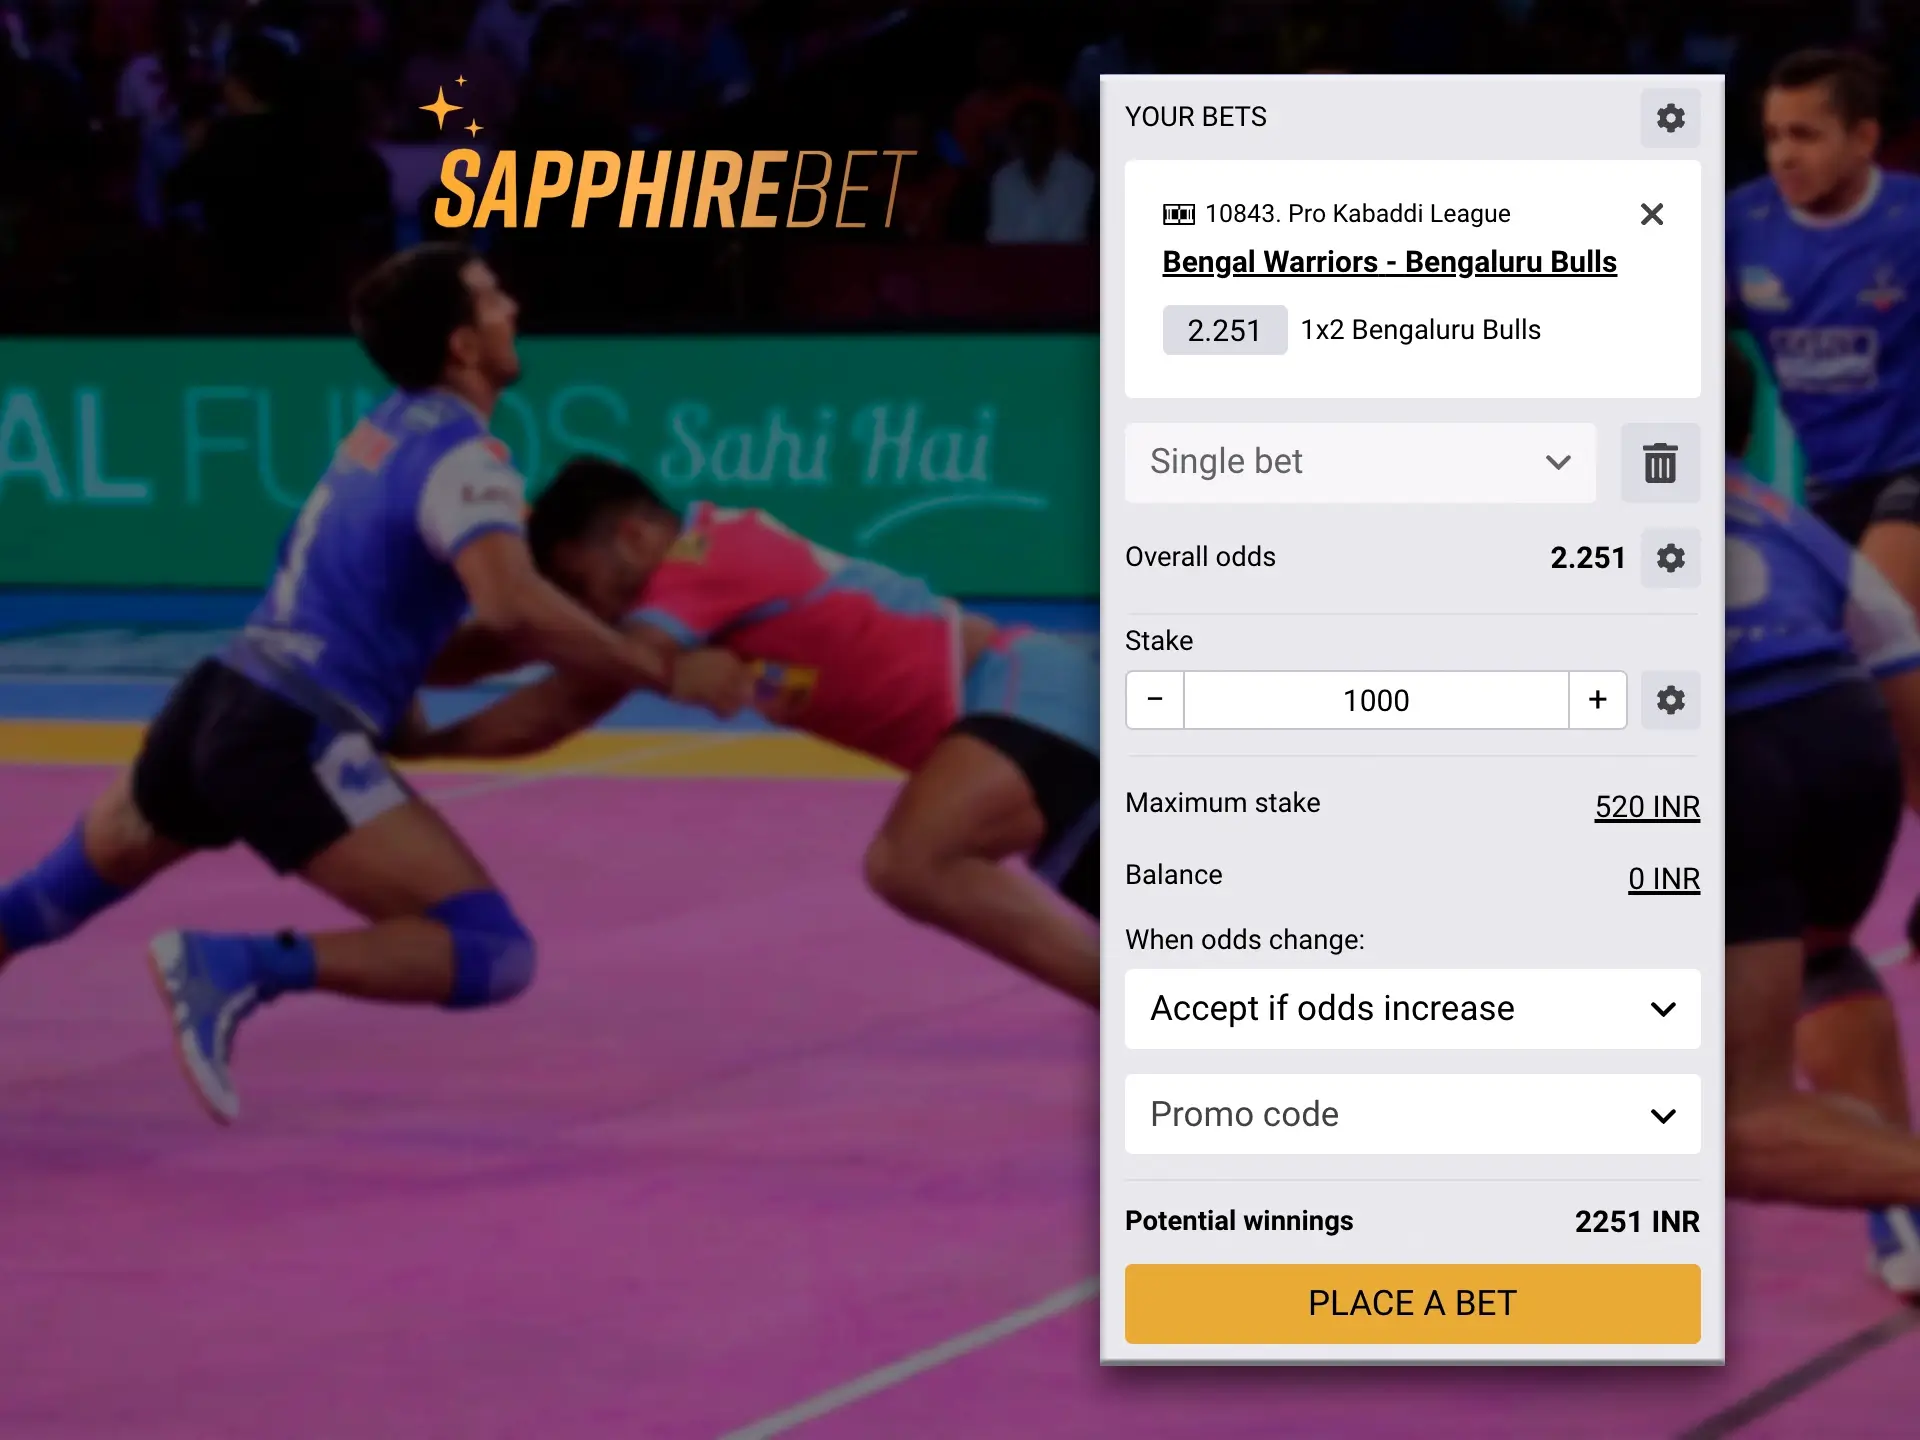 Sapphirebet always gives awesome odds and a minimum betting threshold.